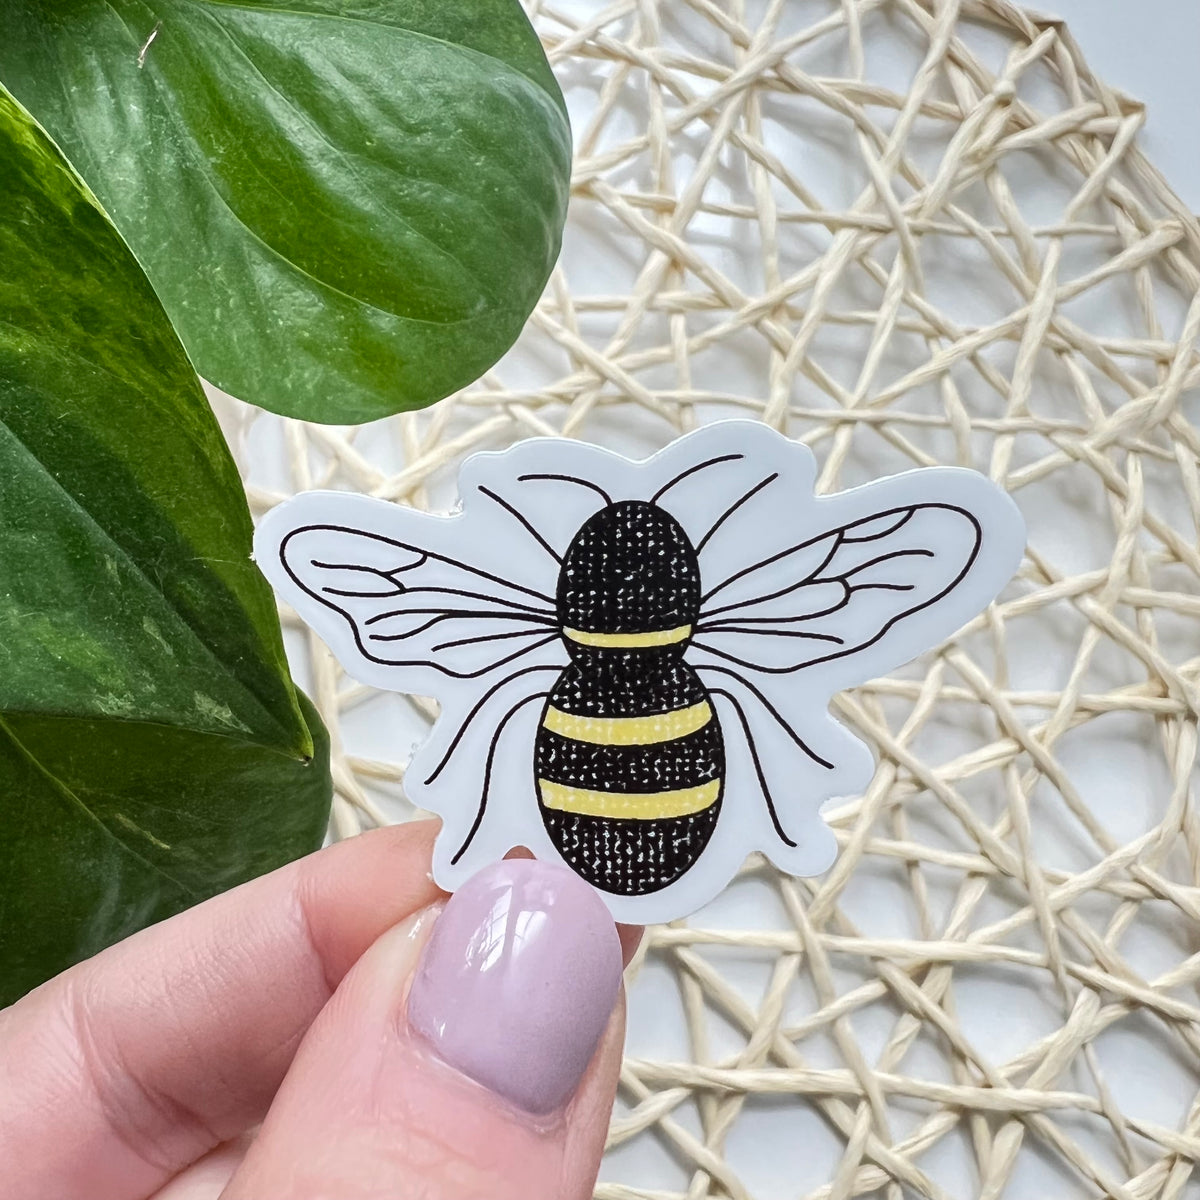 The Bumble Bee Sticker